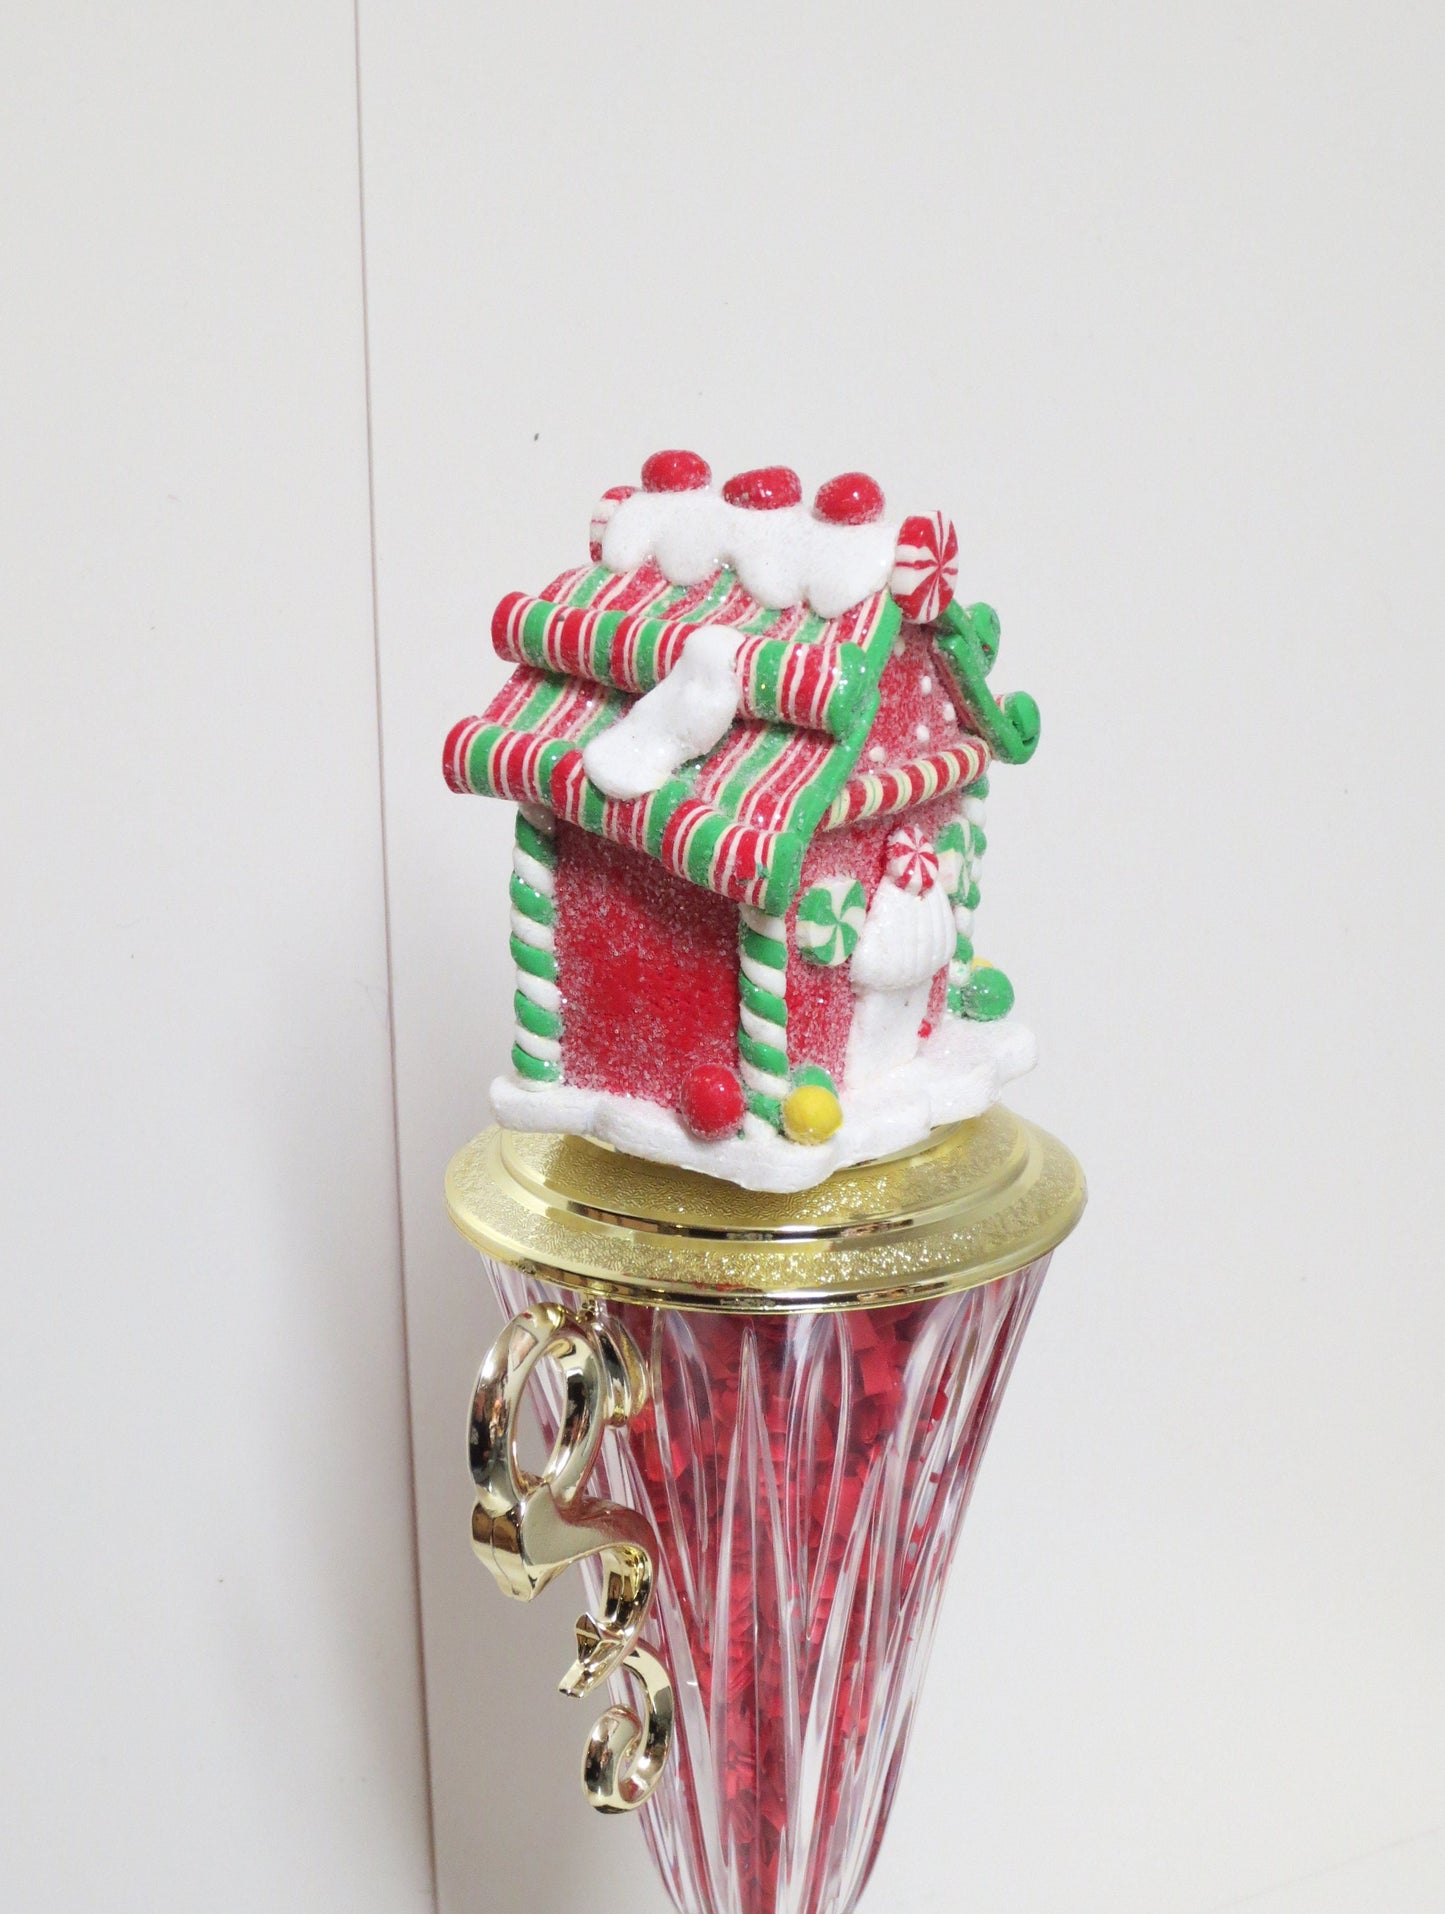 Gingerbread Cookie Bake Off Trophy Ugliest Ugly Sweater Contest Family Christmas Trophy Ribbon Candy Winner Christmas Decor Holiday Decor